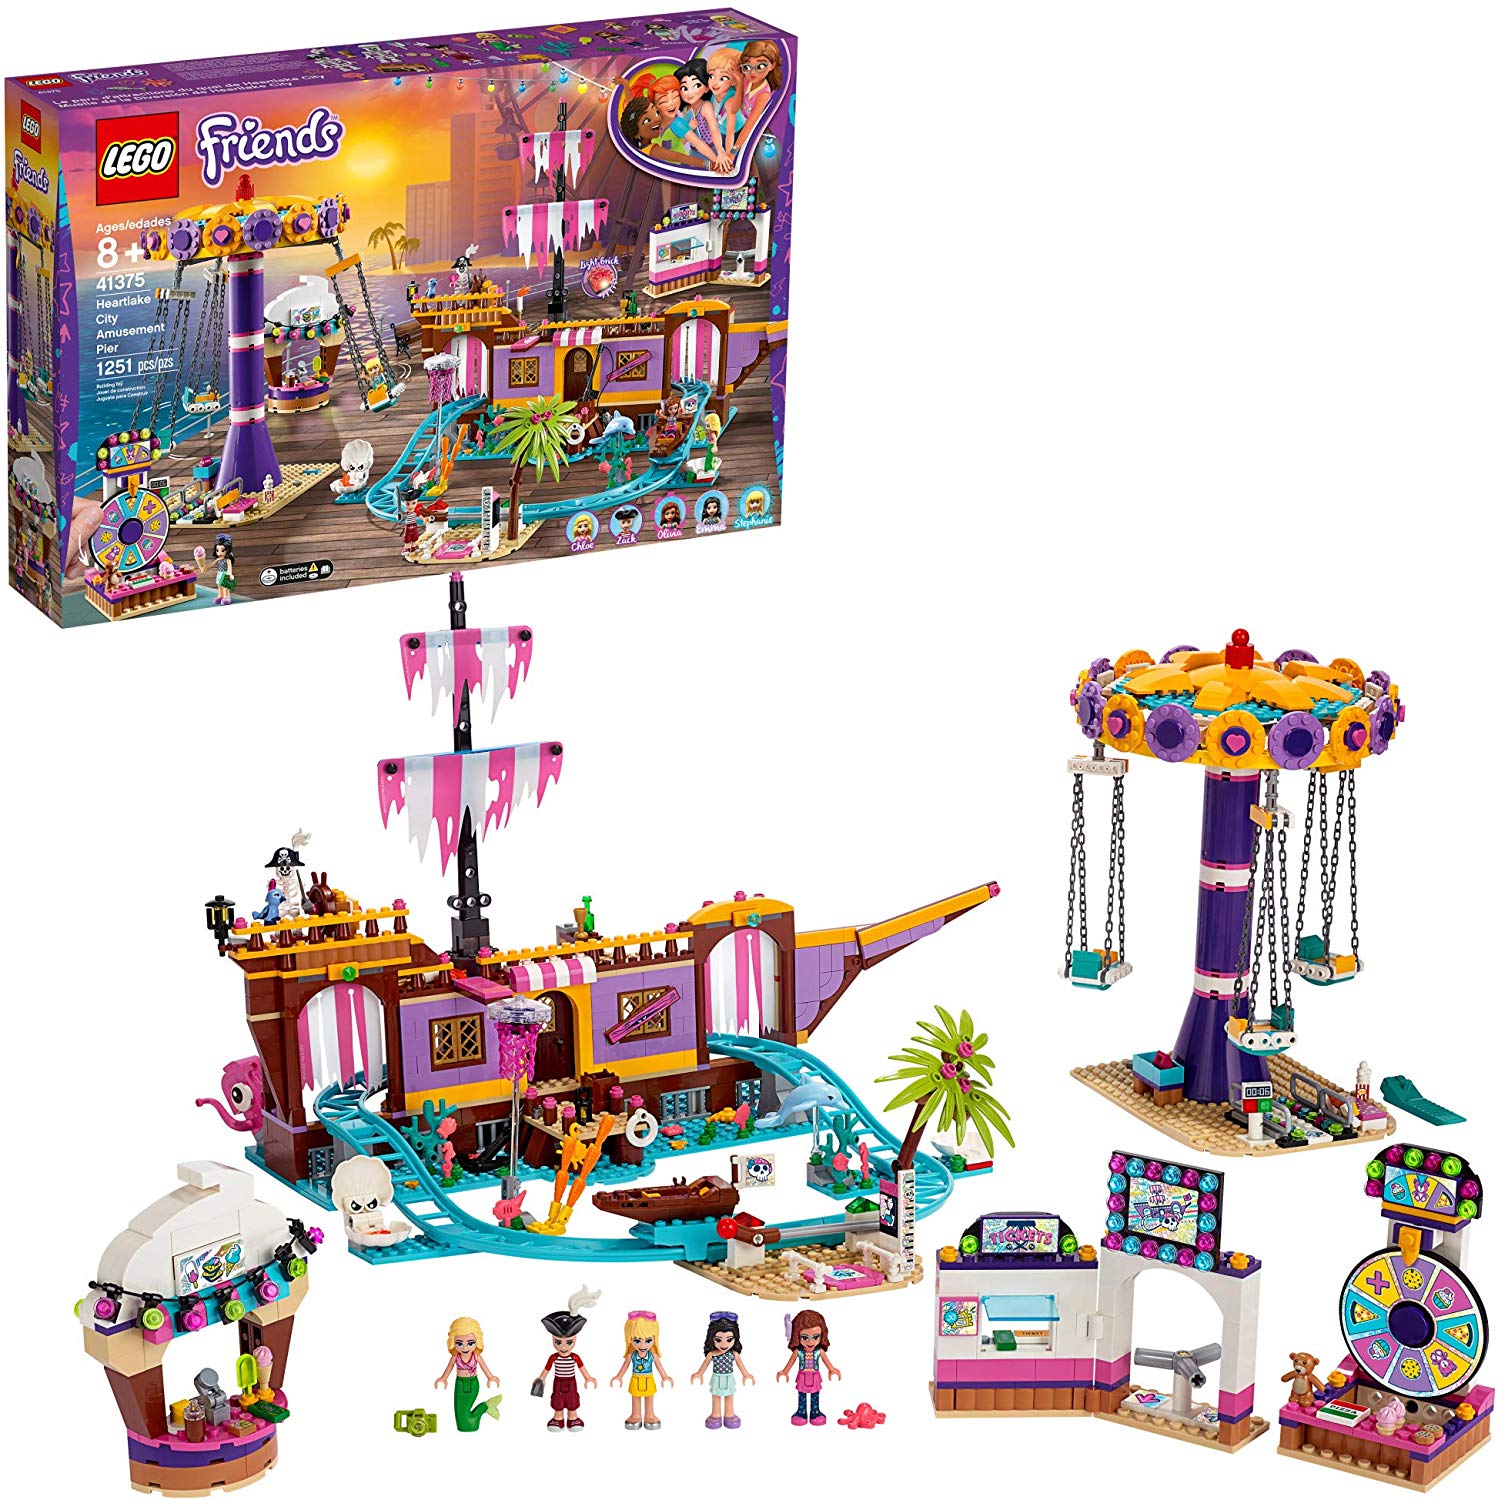 Lego Friends 41375 Fun Beer with Roller Coaster New 2019 (1251 Pieces)